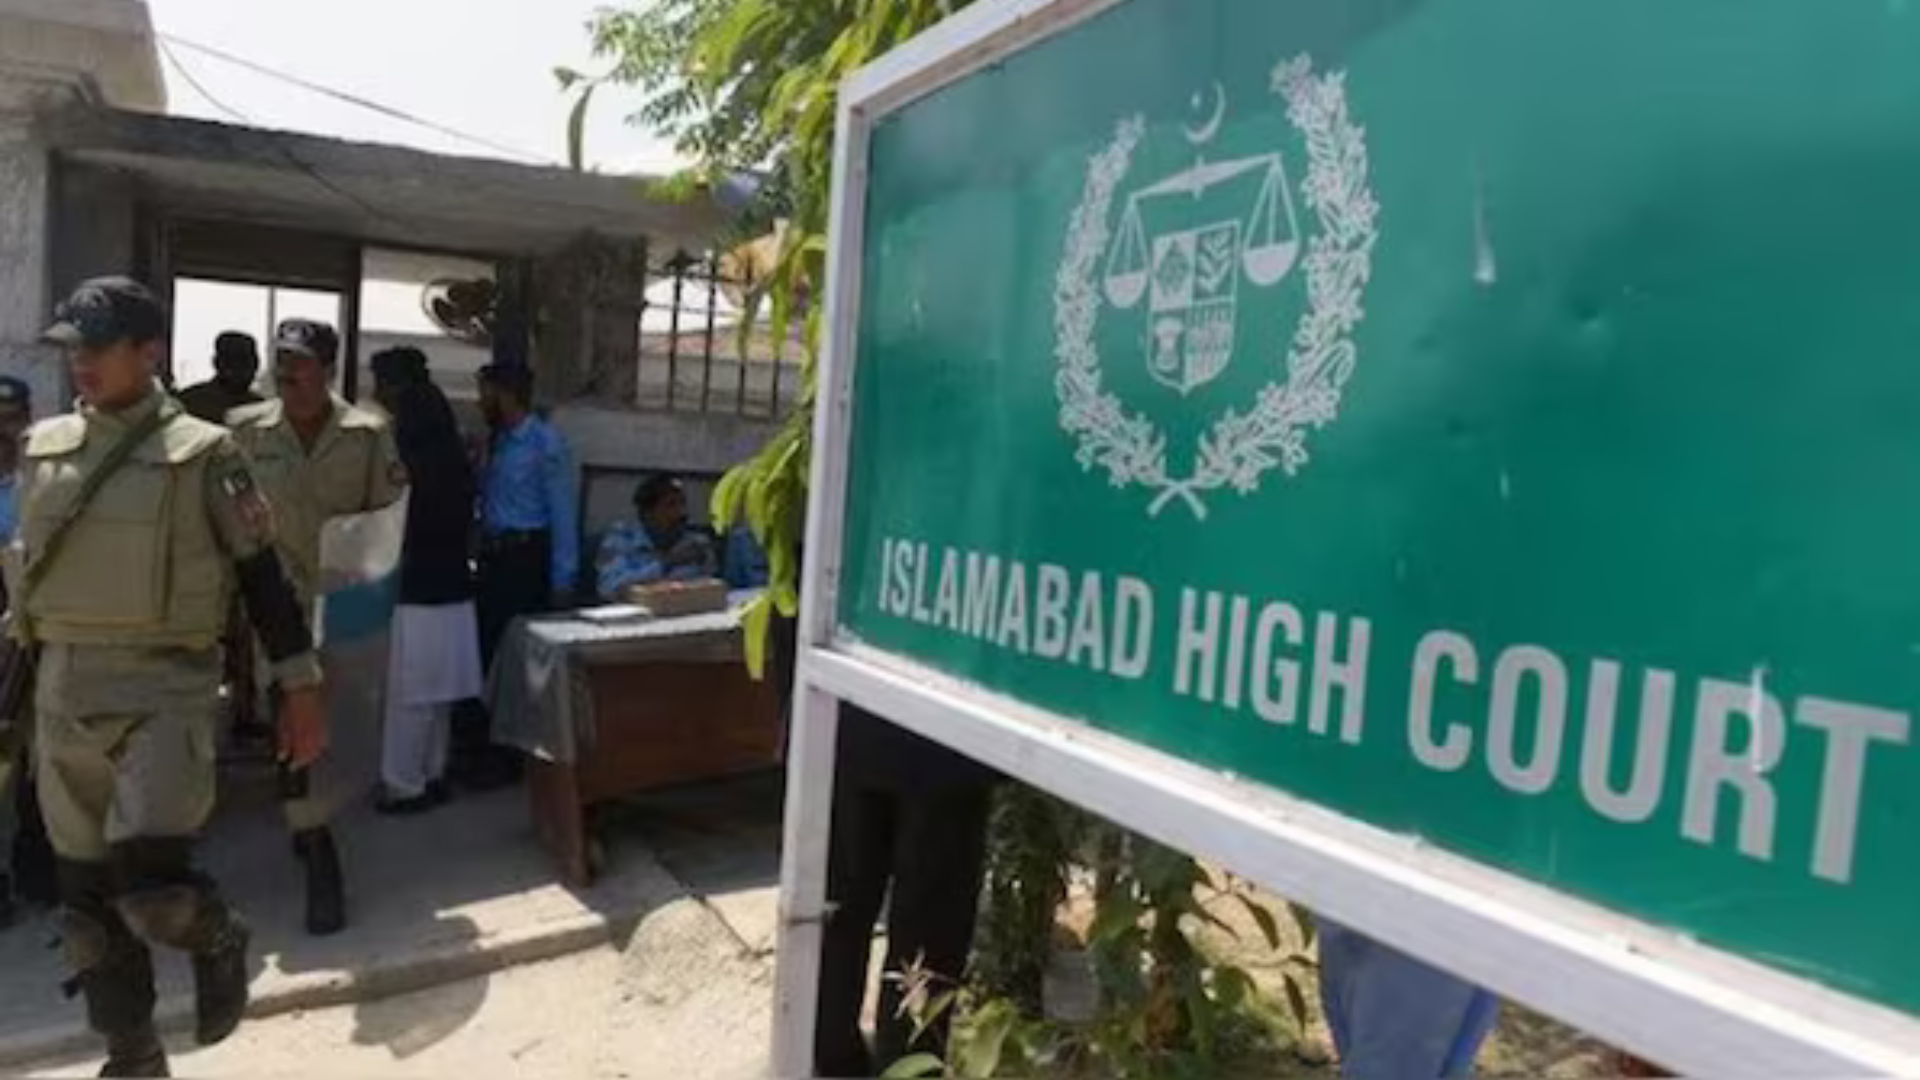 Pakistan Admits PoK Is A ‘Foreign Land’ In Islamabad High Court